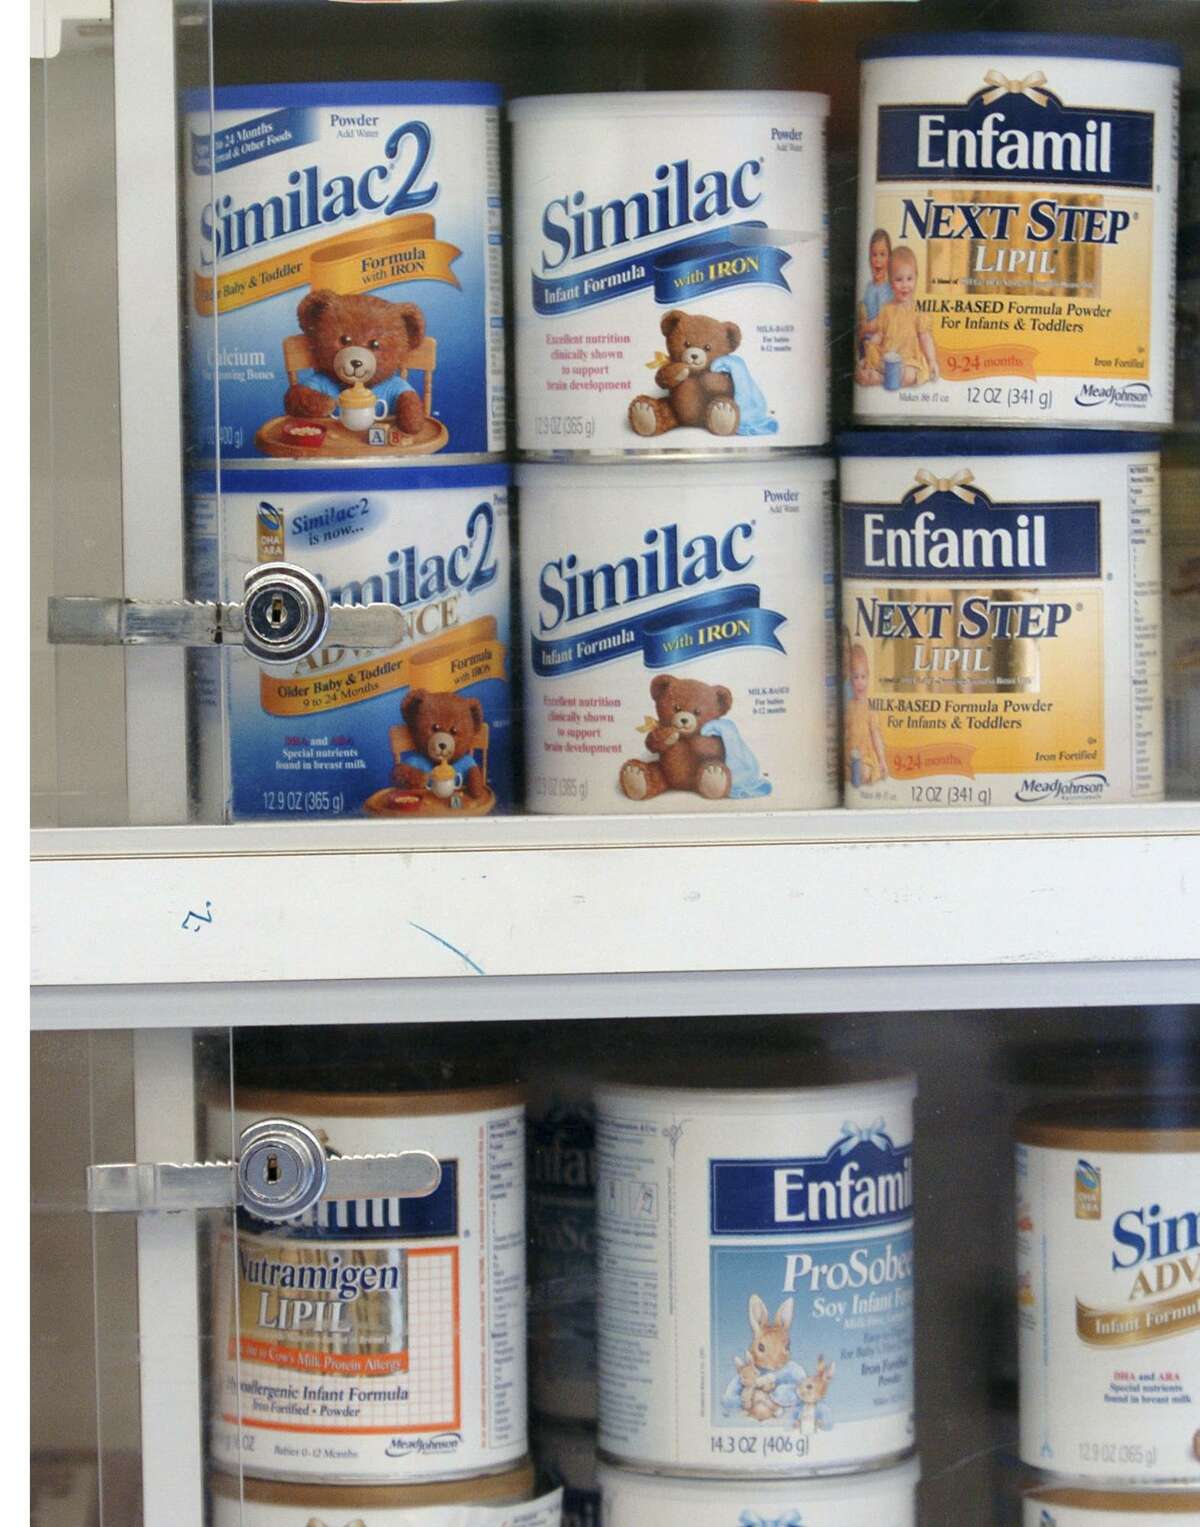 In Texas, about half of infants receive infant formula via the Special Supplemental Nutrition Program for Women, Infants, and Children (WIC). This program provides most but not all of the infant’s needs. Its widespread adoption has had considerable benefits including a marked decrease in serious health problems for infants such as anemia.